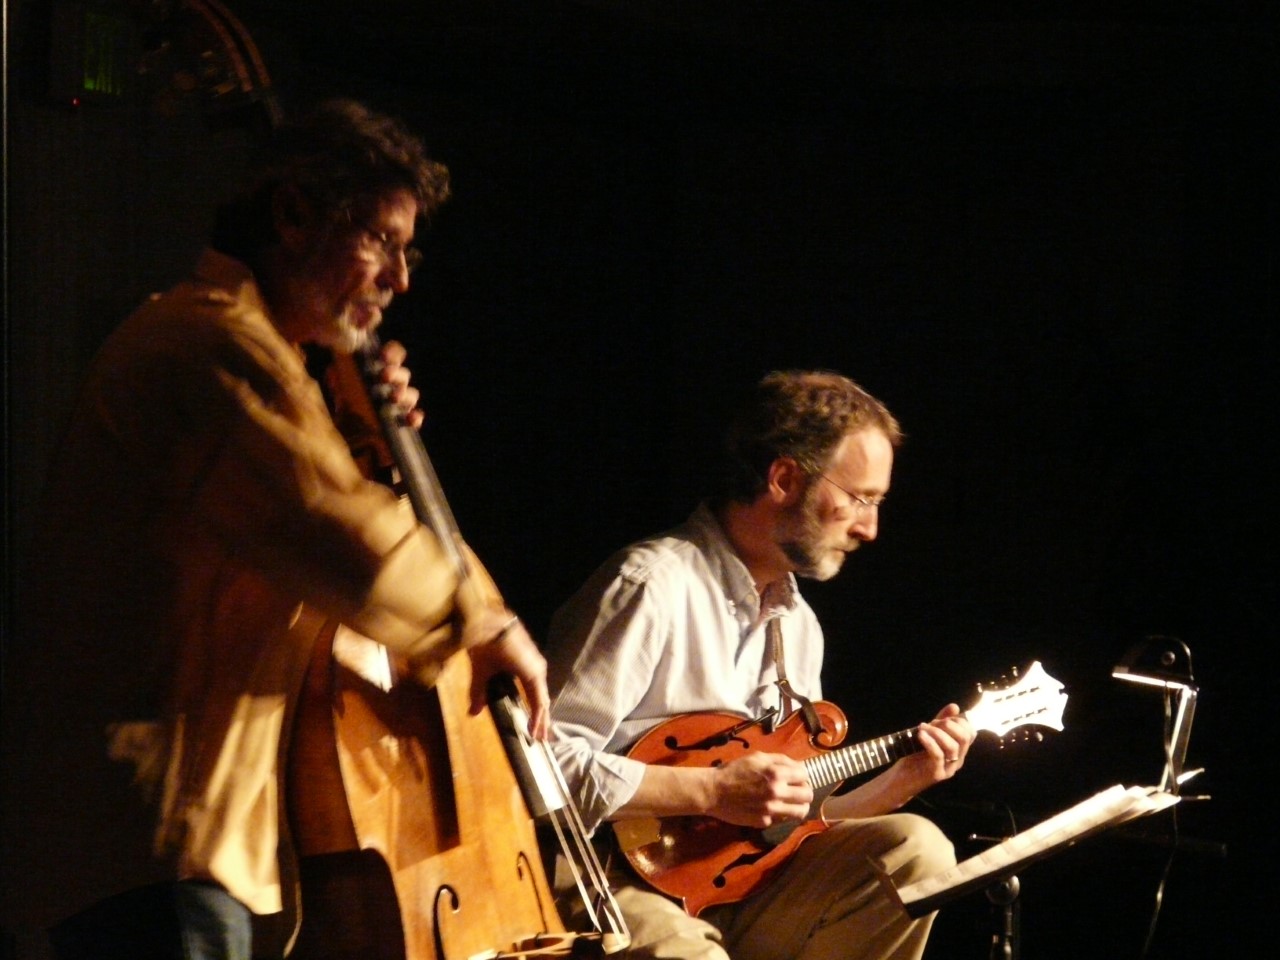 Bill and Gunnar of MandoBasso playing their instruments